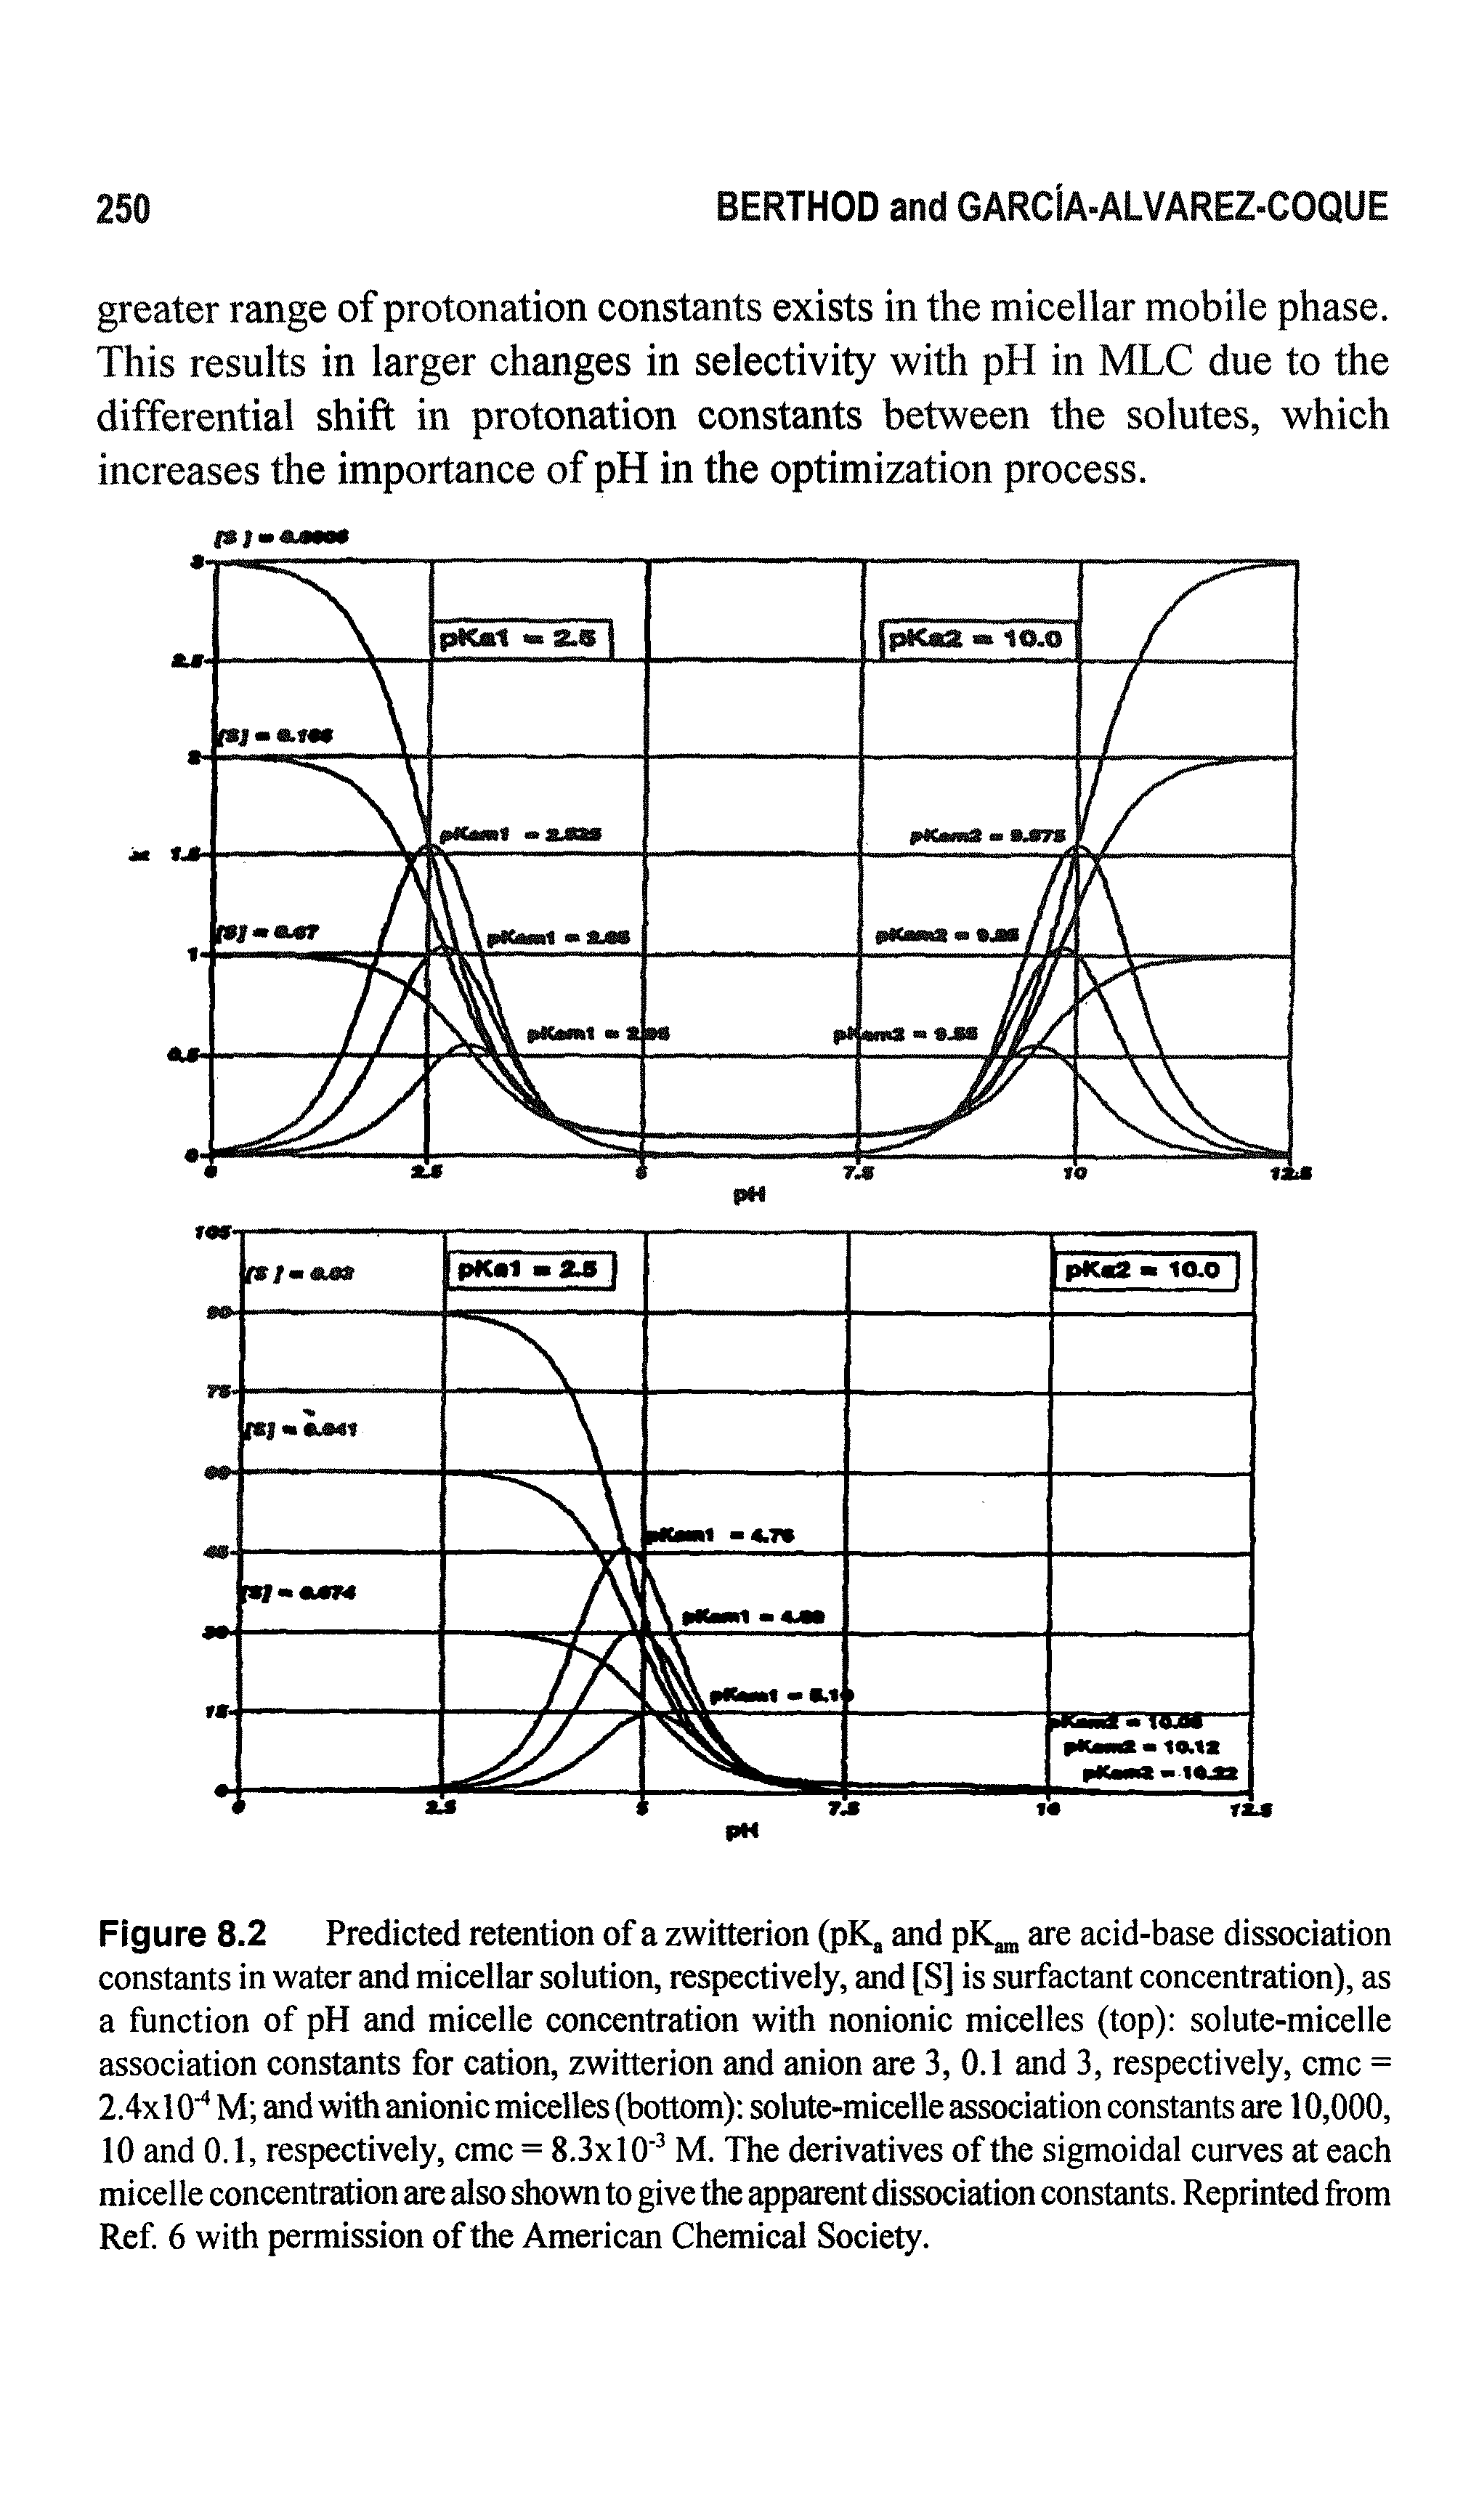 Figure 8.2 Predicted retention of a zwitterion (pK and pK are acid-base dissociation constants in water and micellar solution, respectively, and [S] is surfactant concentration), as a function of pH and micelle concentration with nonionic micelles (top) solute-micelle association constants for cation, zwitterion and anion are 3, 0.1 and 3, respectively, cmc = 2.4x10 M and with anionic micelles (bottom) solute-micelle association constants are 10,000, 10 and 0.1, respectively, cmc = 8.3x10 M. The derivatives of the sigmoidal curves at each micelle concentration are also shown to give the apparent dissociation constants. Reprinted from Ref 6 with permission of the American Chemical Society.